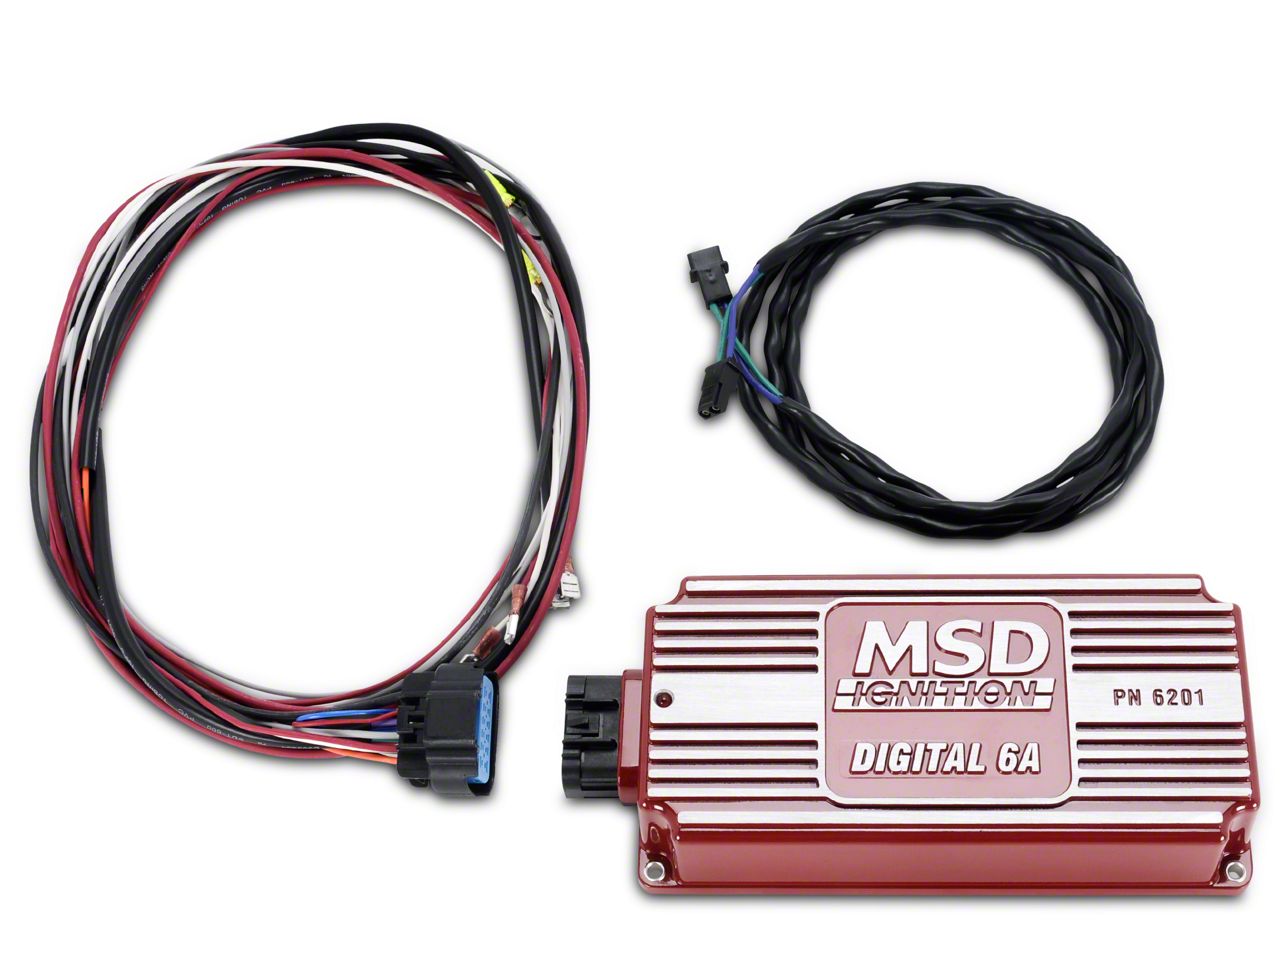 MSD Mustang 6A Digital Ignition Module 6201 (79-95 Mustang) - Free